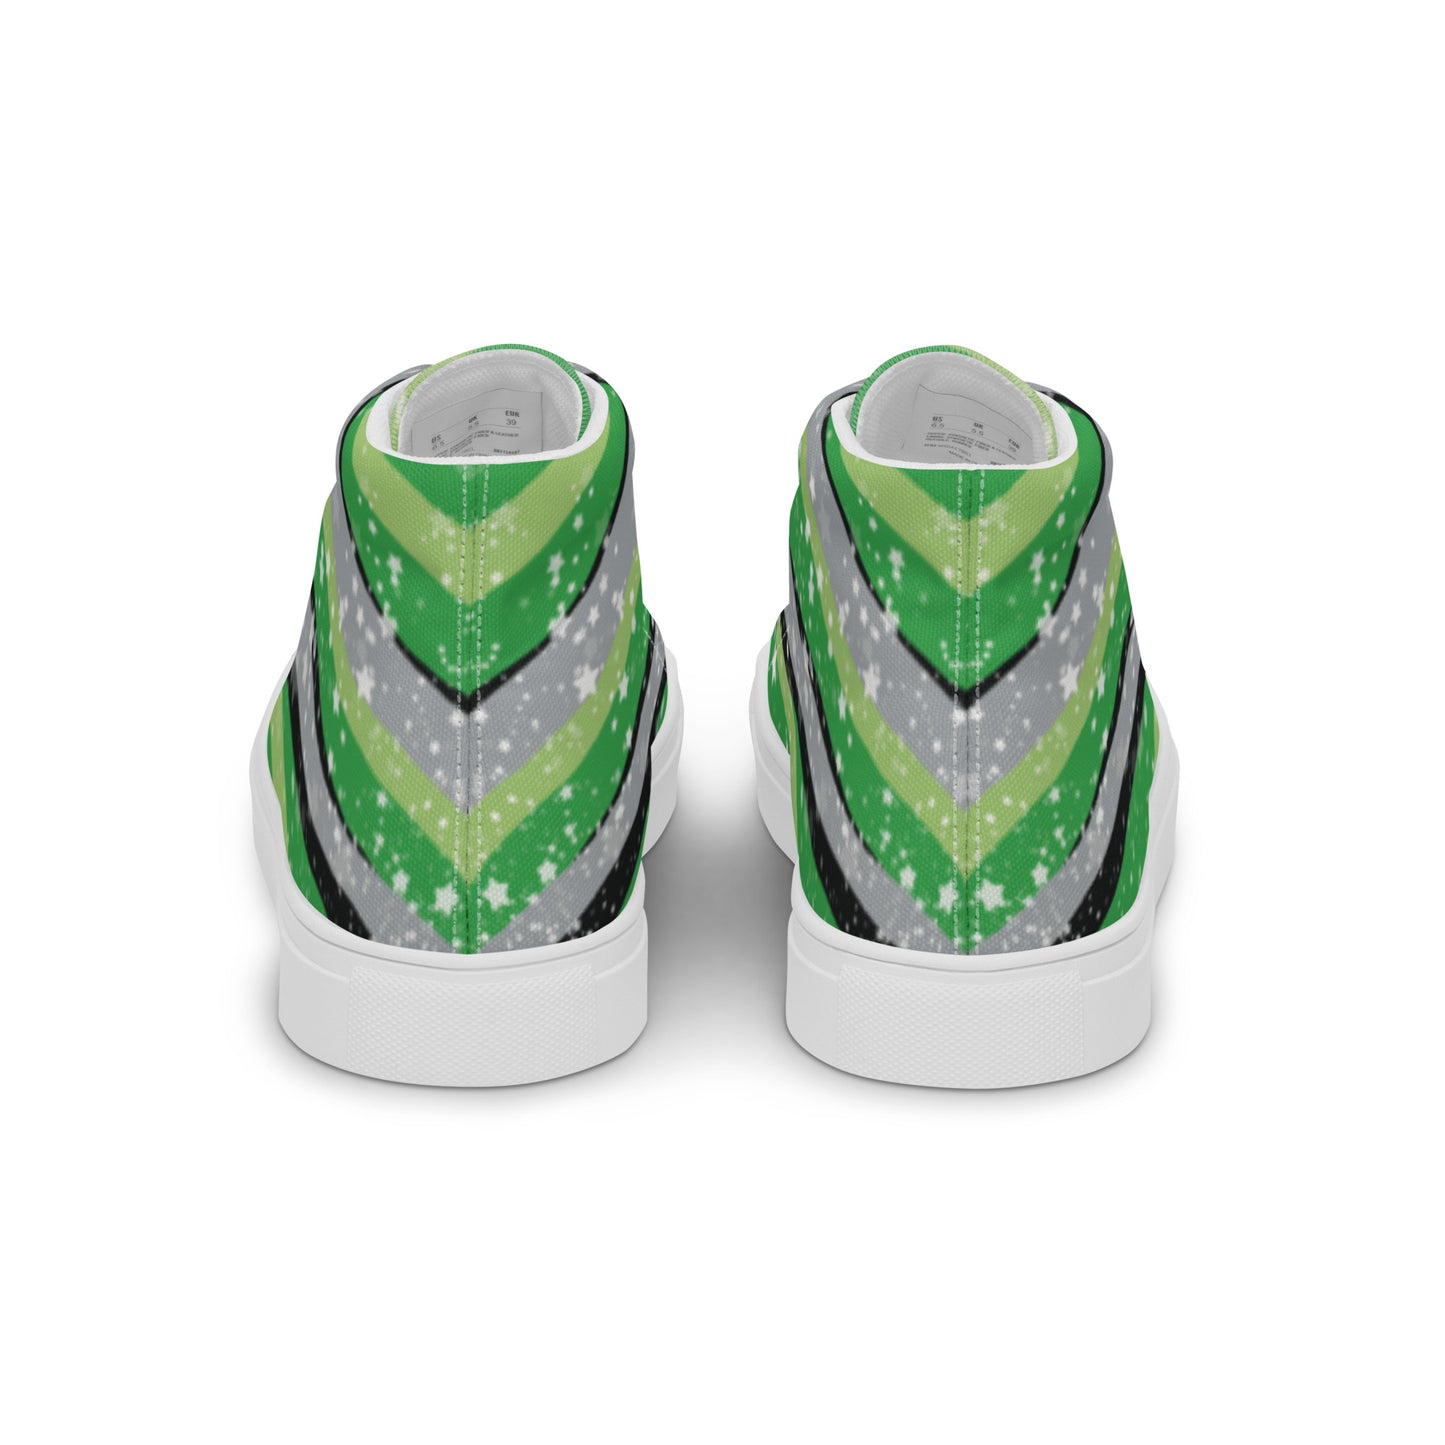 Back view: a pair of high-top shoes with ribbons of the greens, grey, and black of the aromantic pride flag coming from the heel and expanding towards the laces with an explosion of stars over it, white accents, and the Aras Sivad Studio logo in white on the tongue.